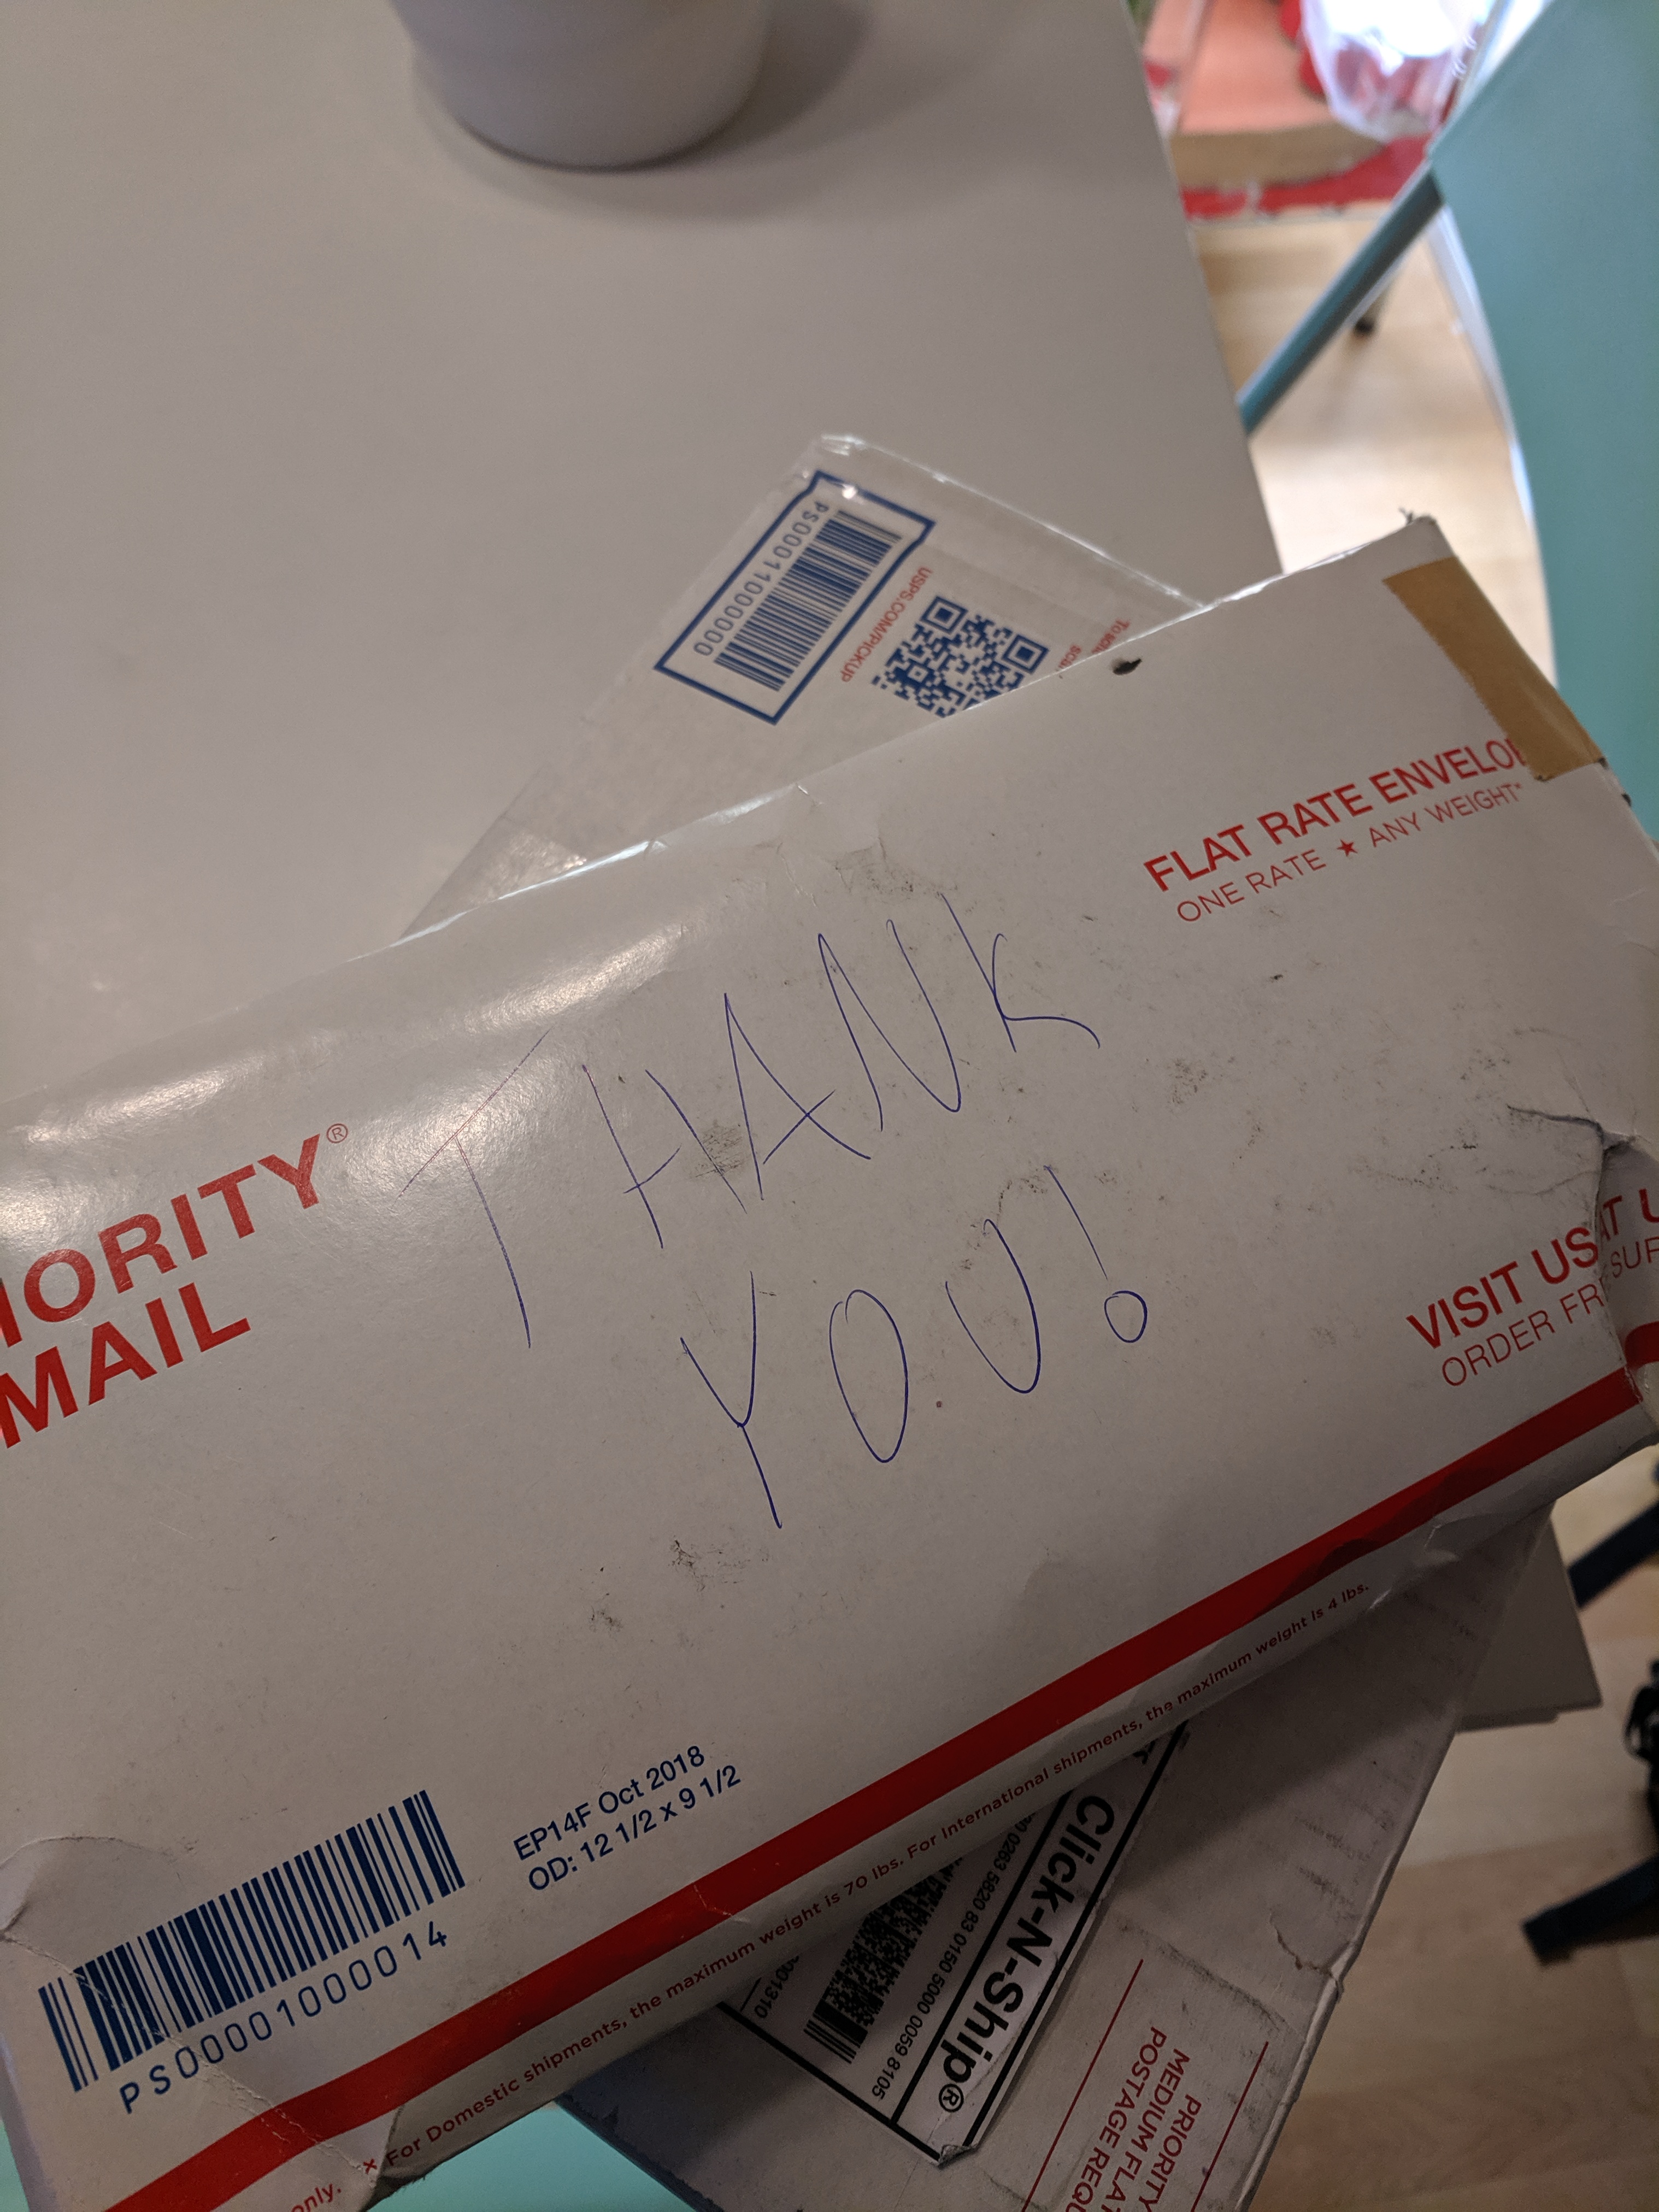 Small rectangular USPS package